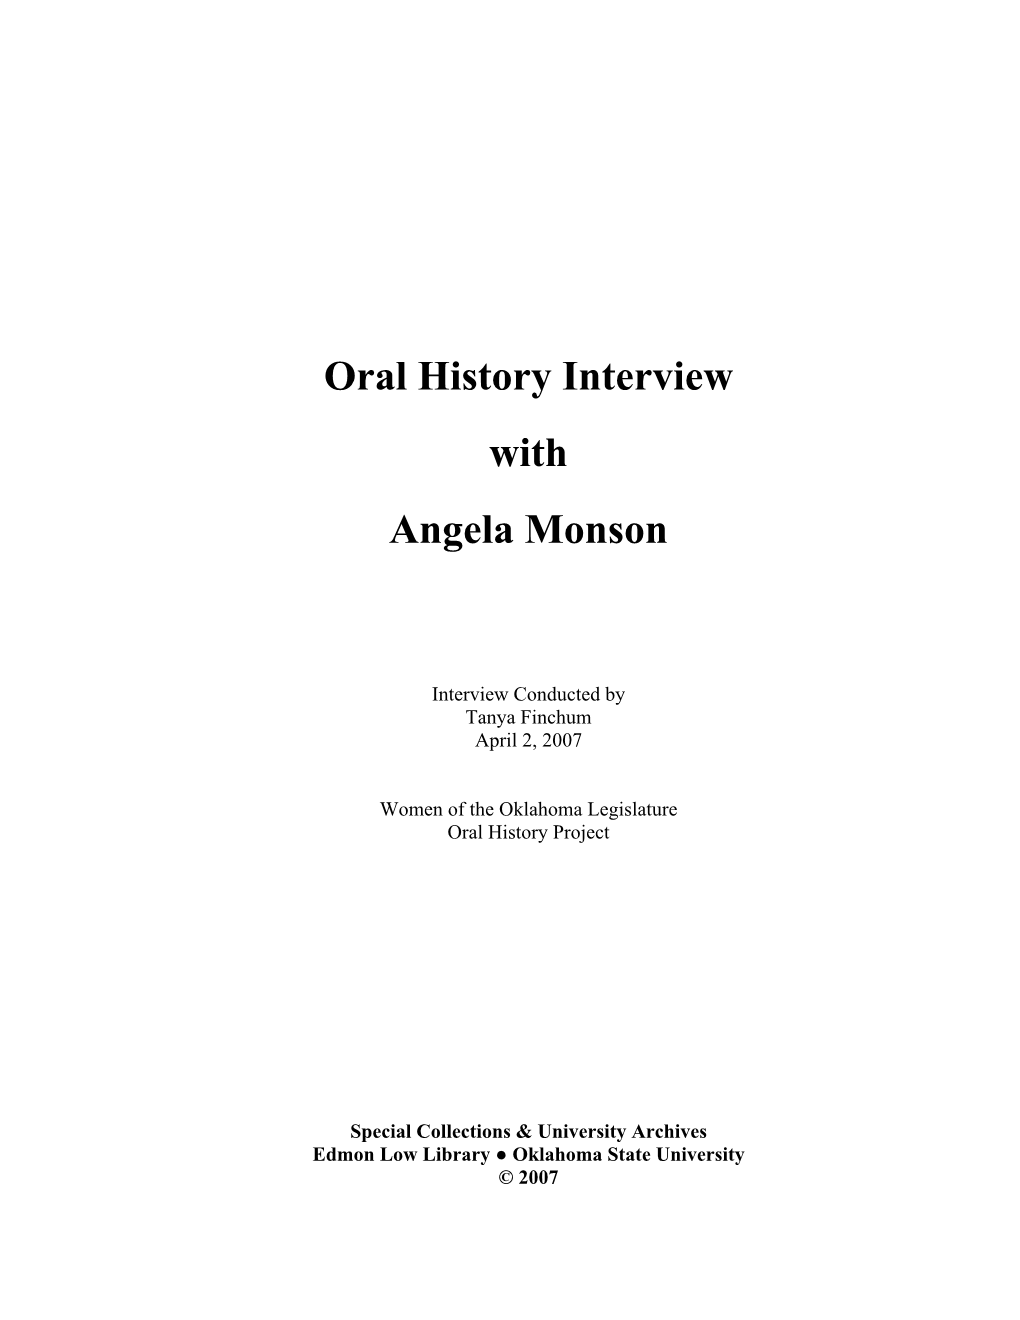 Oral History Interview with Angela Monson